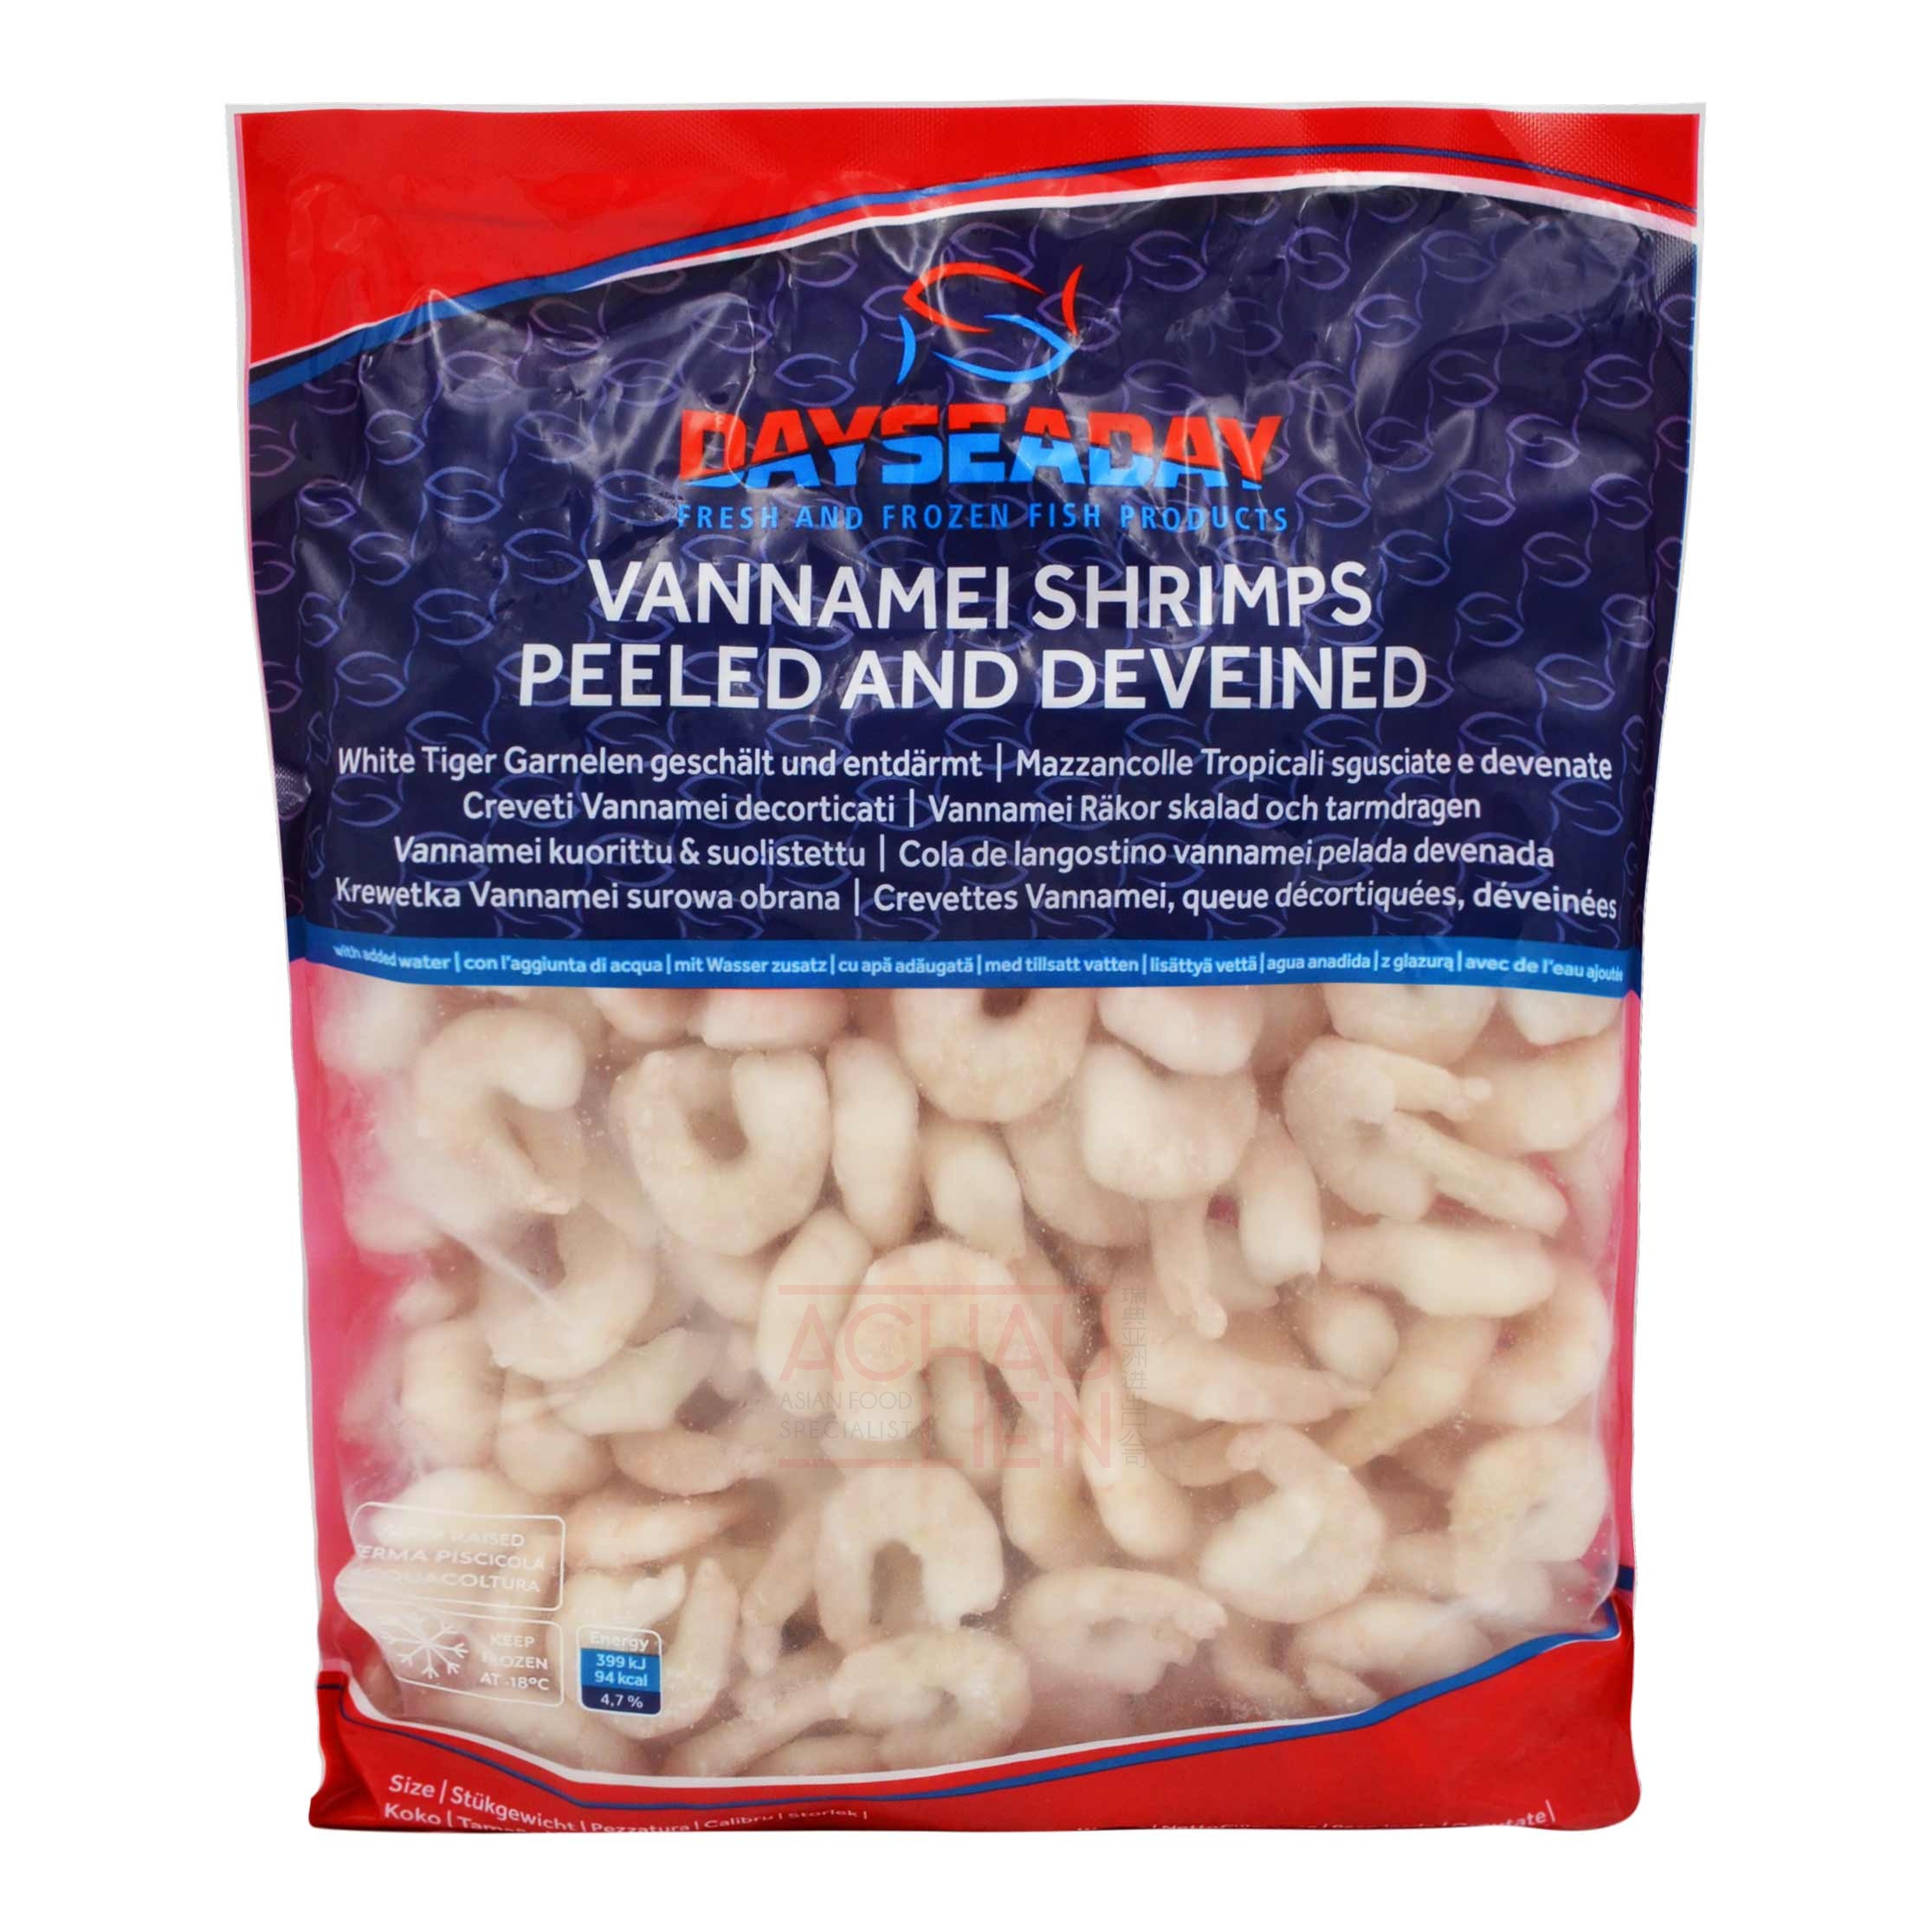 White Seafood PUD IQF Frozen Shrimp, Packaging Type Tharmacol Box, Rs